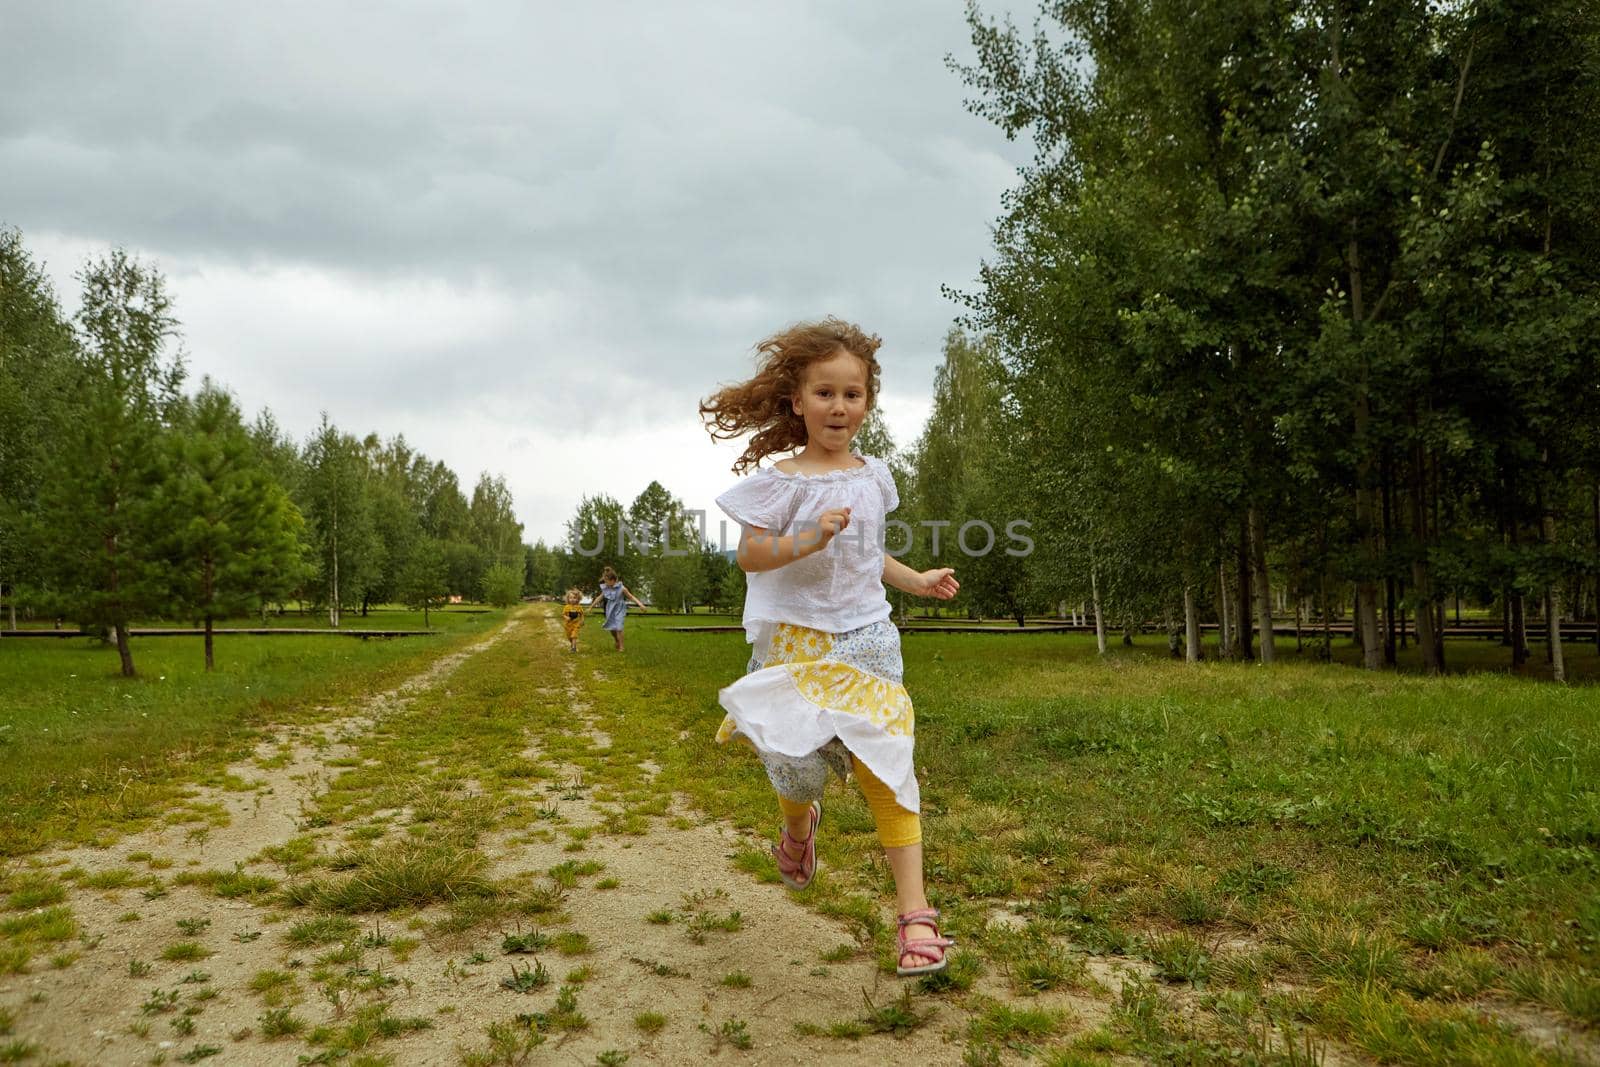 Girl running on path in countryside in nature by Demkat